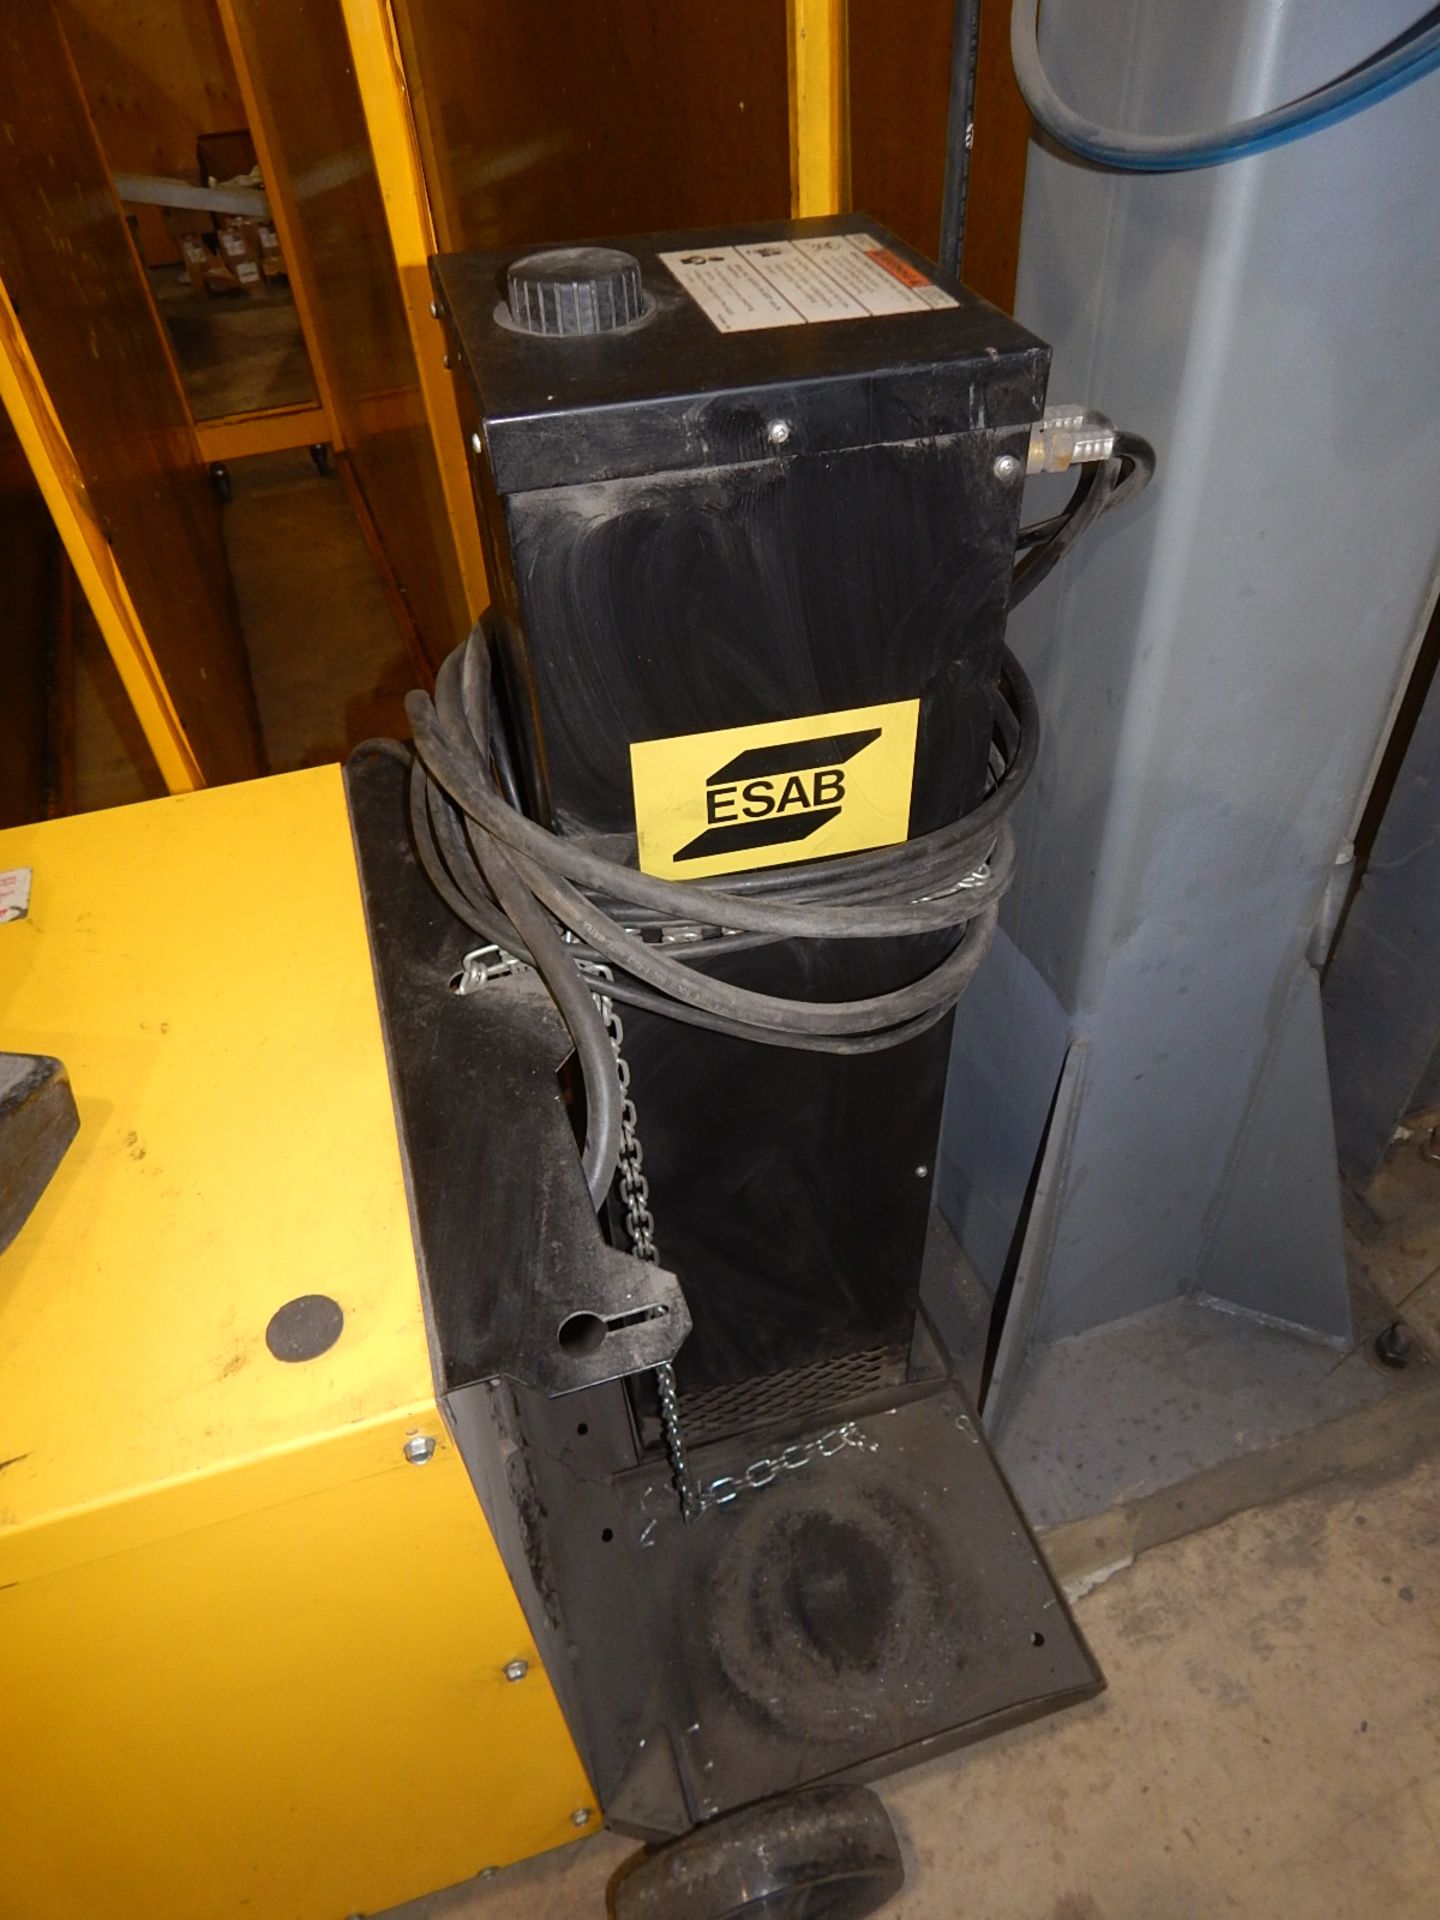 ESAB HELIARC 252 AC/DC ARC WELDER WITH COOLANT, CABLES AND GUN, S/N: TL-J209001 - Image 3 of 4